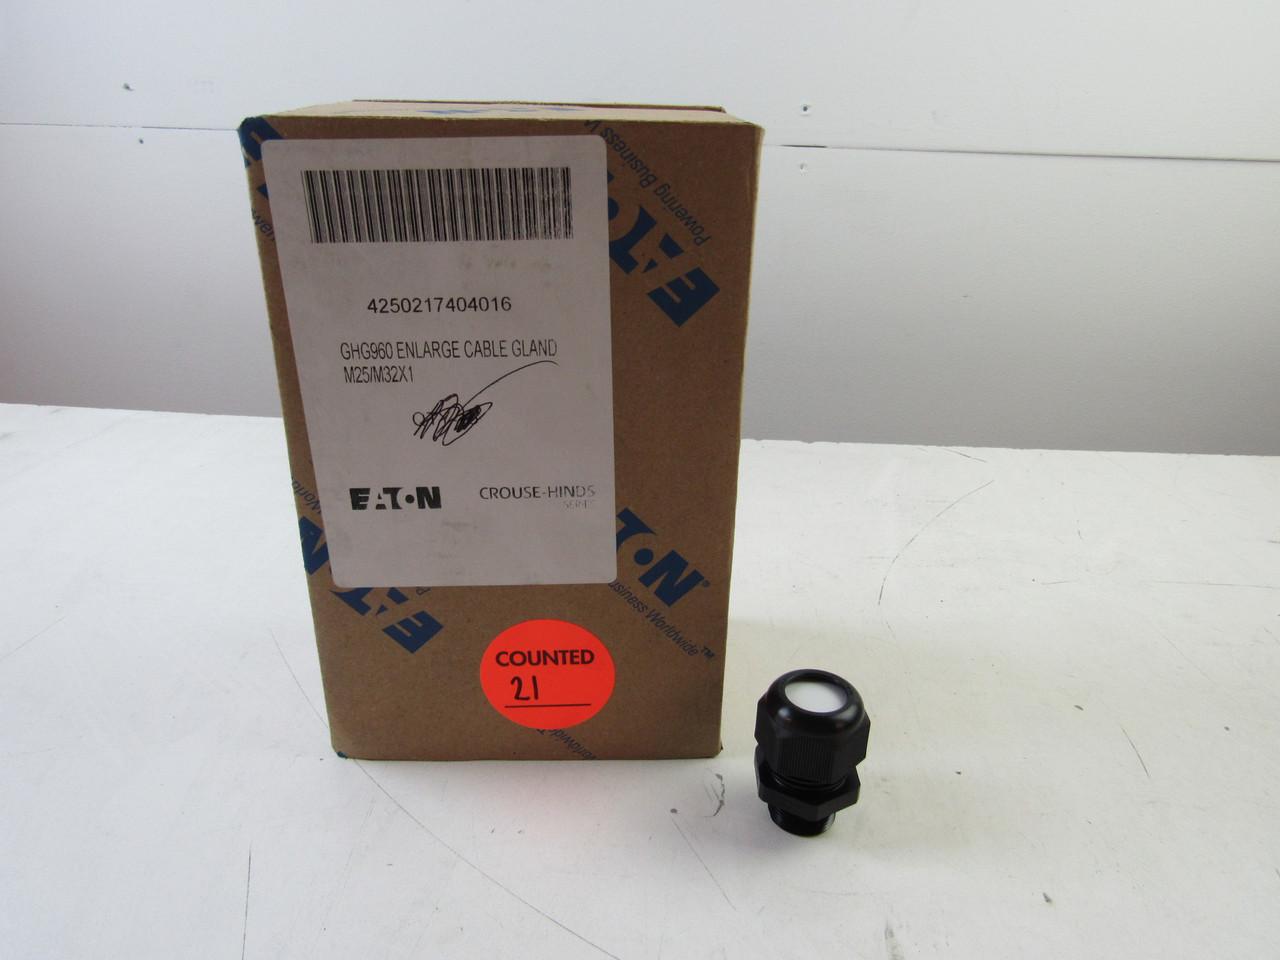 Eaton GHG960 Eaton GHG960 Misc. Cable and Wire Accessories Cable Gland Black